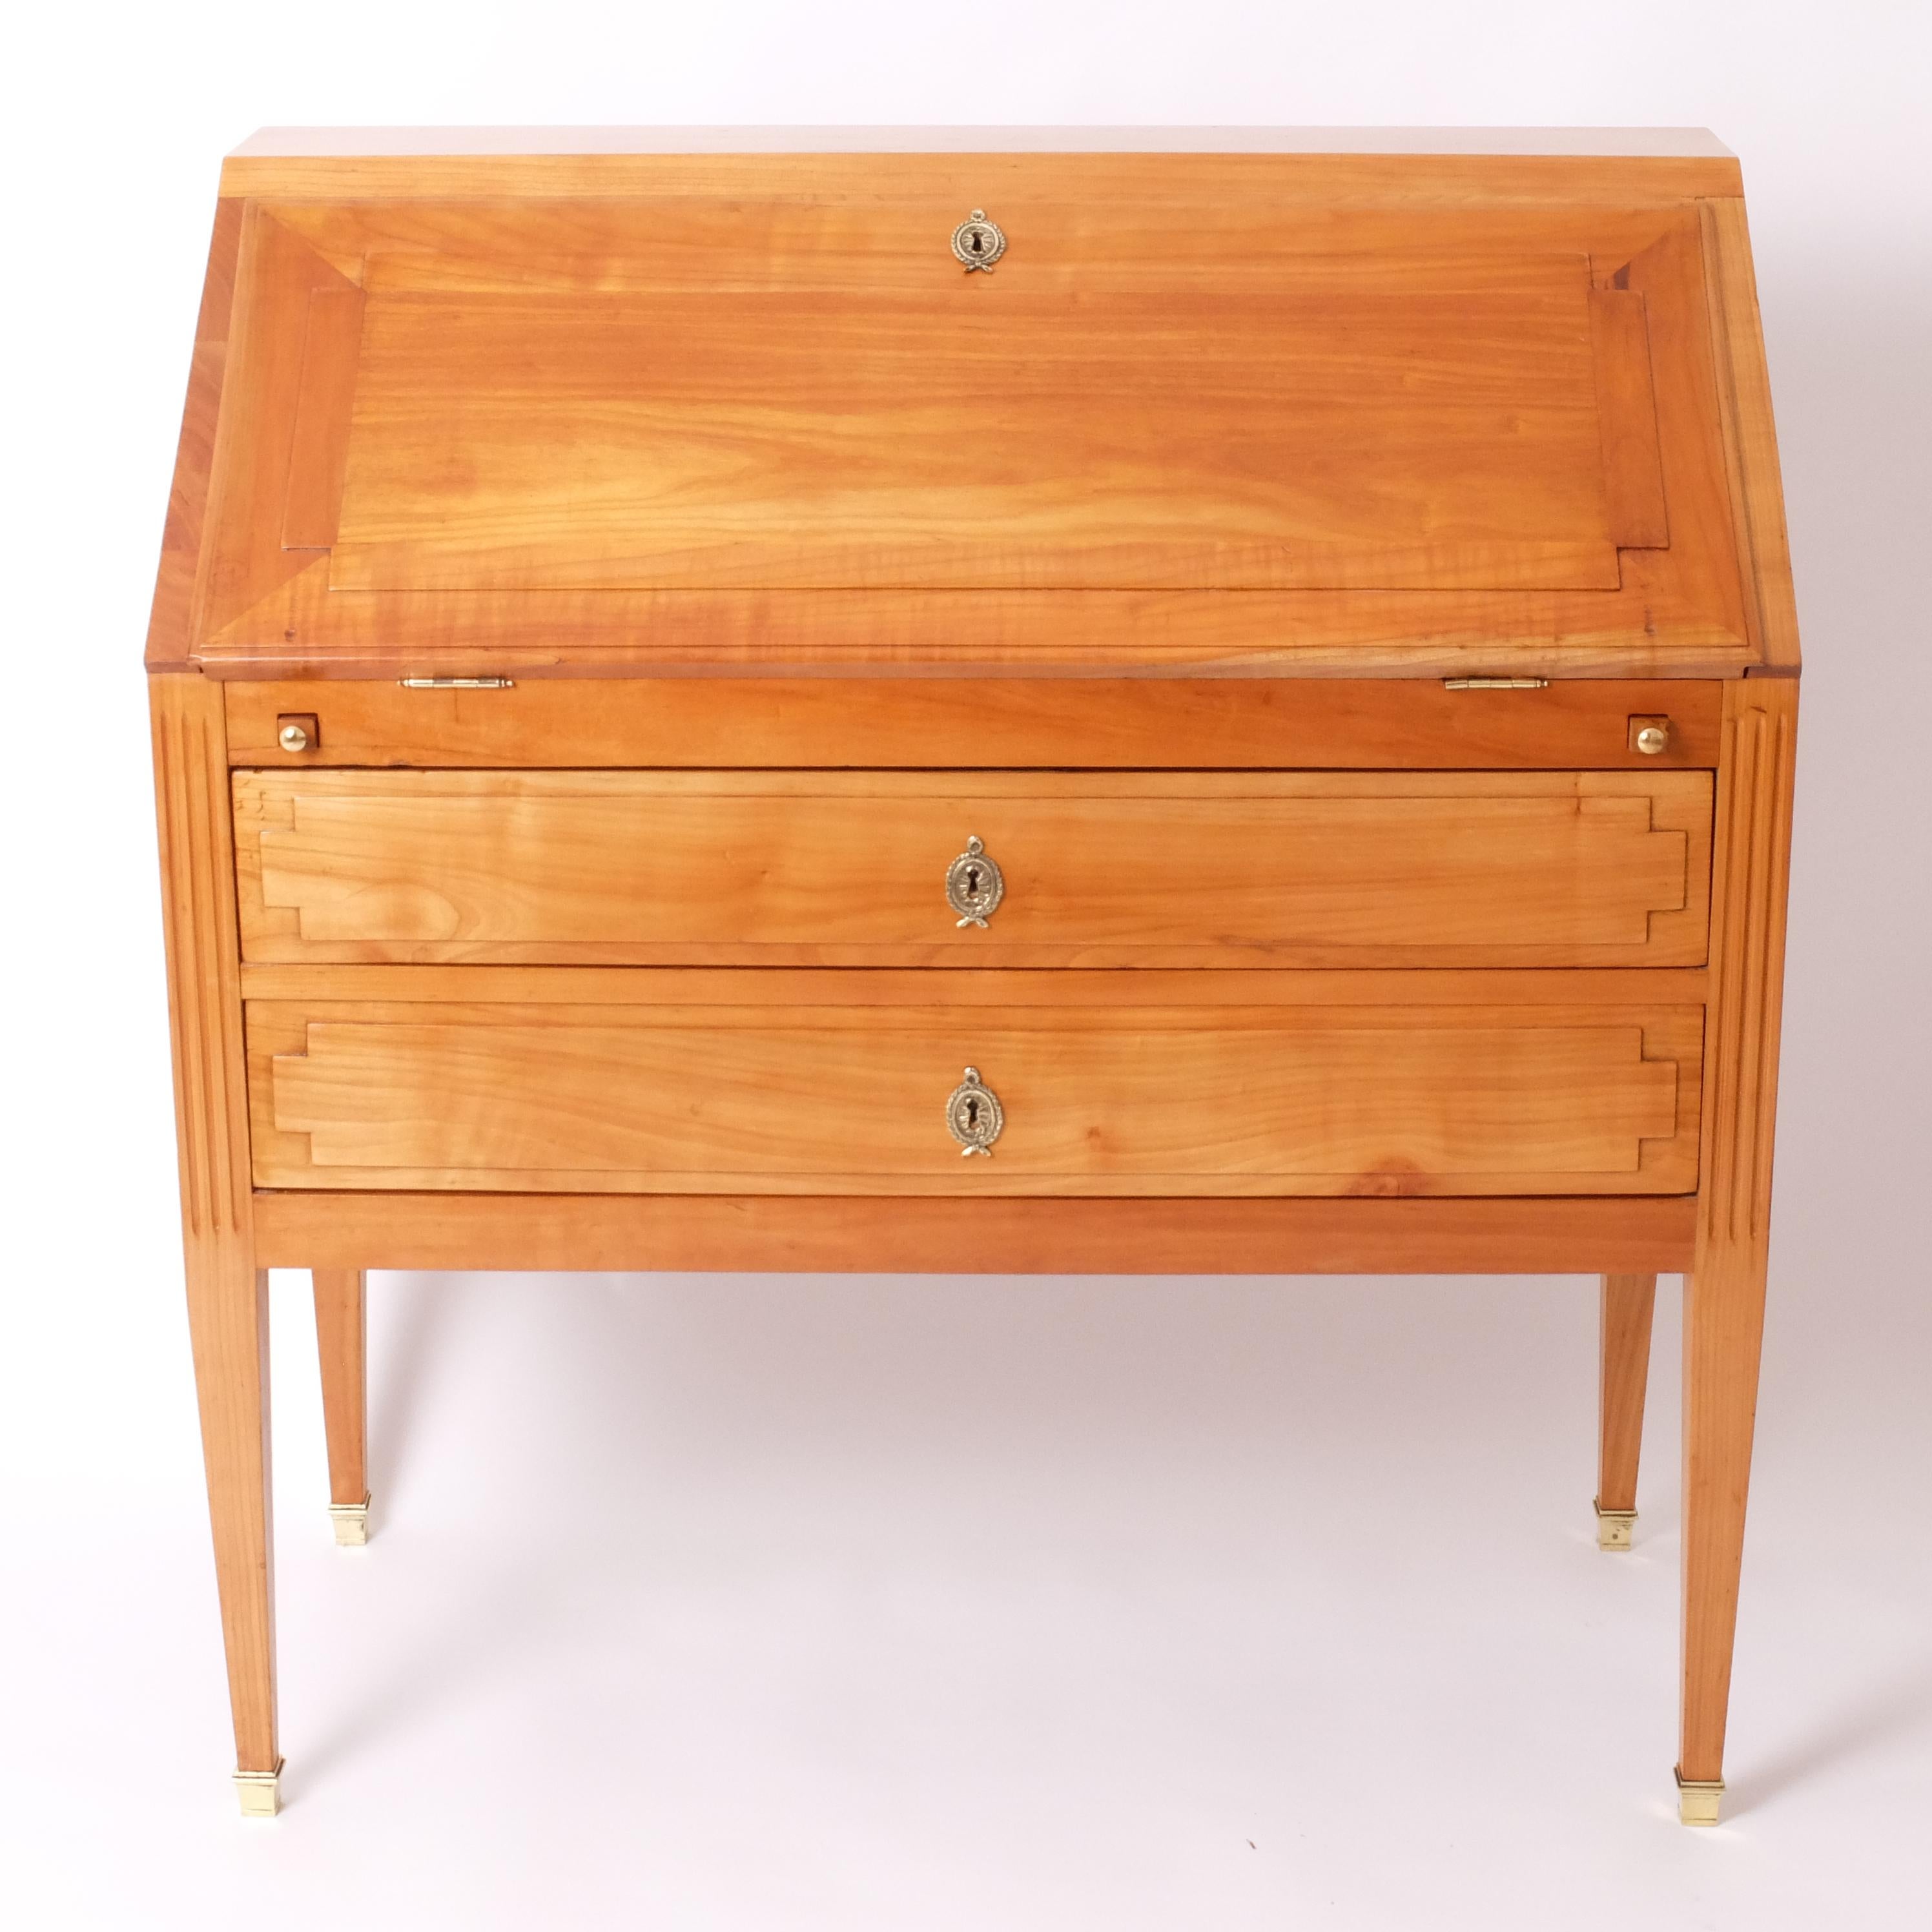 A Jacques Quinet neoclassic desk with leather tablet and bronze legs in sycamore.